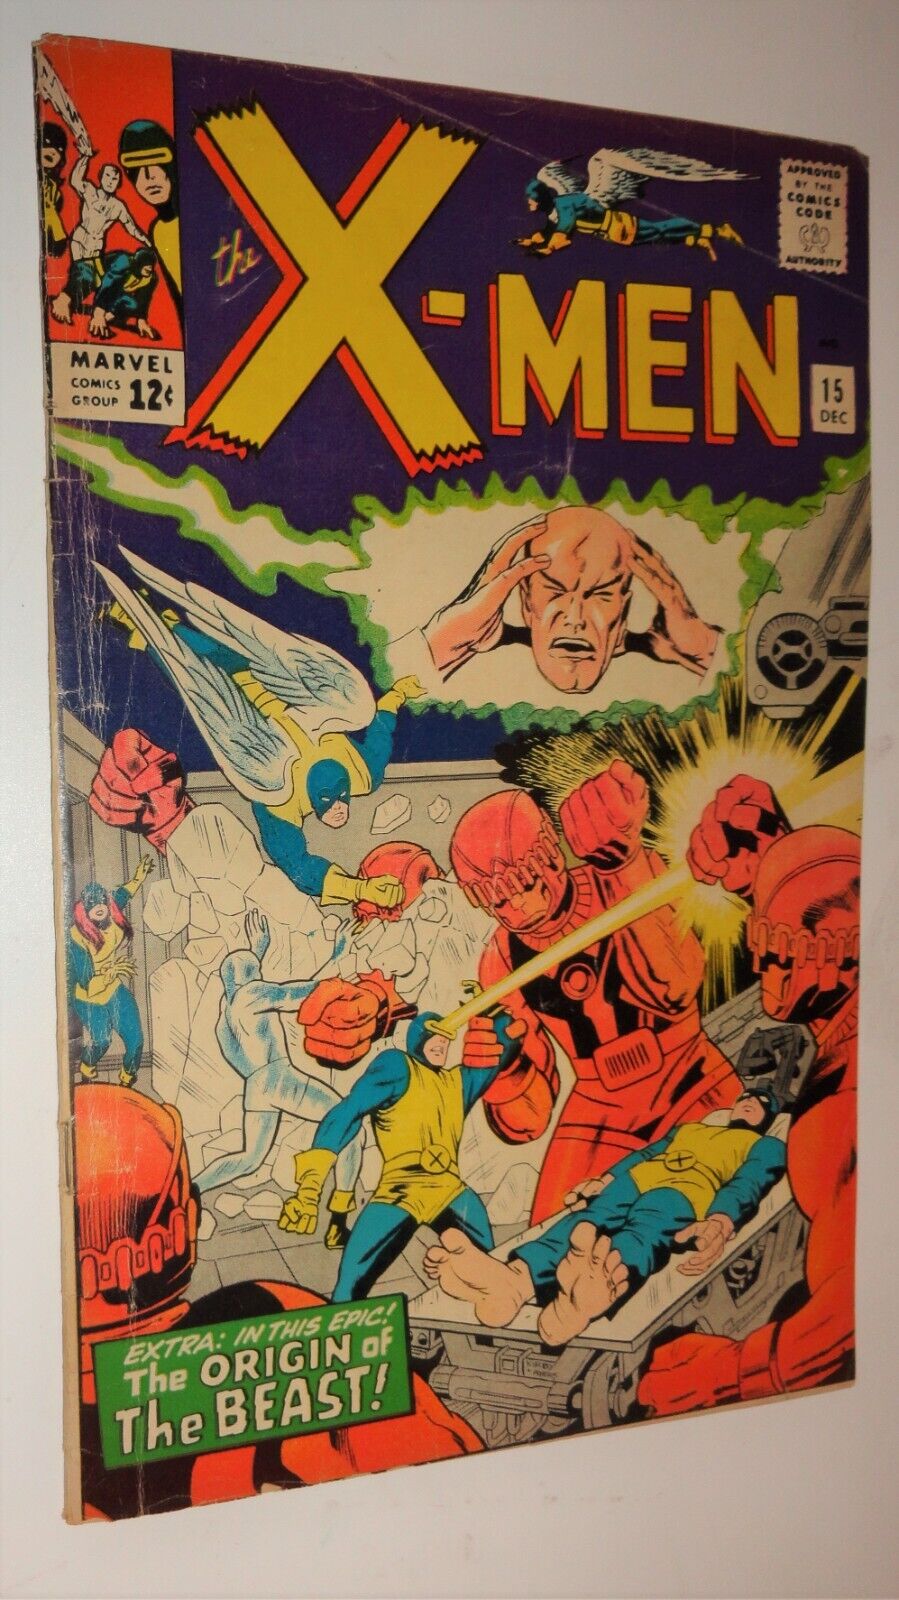 X-MEN #15 SENTINELS  QUALIFIED 4.5 ORGIN BEAST COUPON CUT NON STORY PAGE 1965